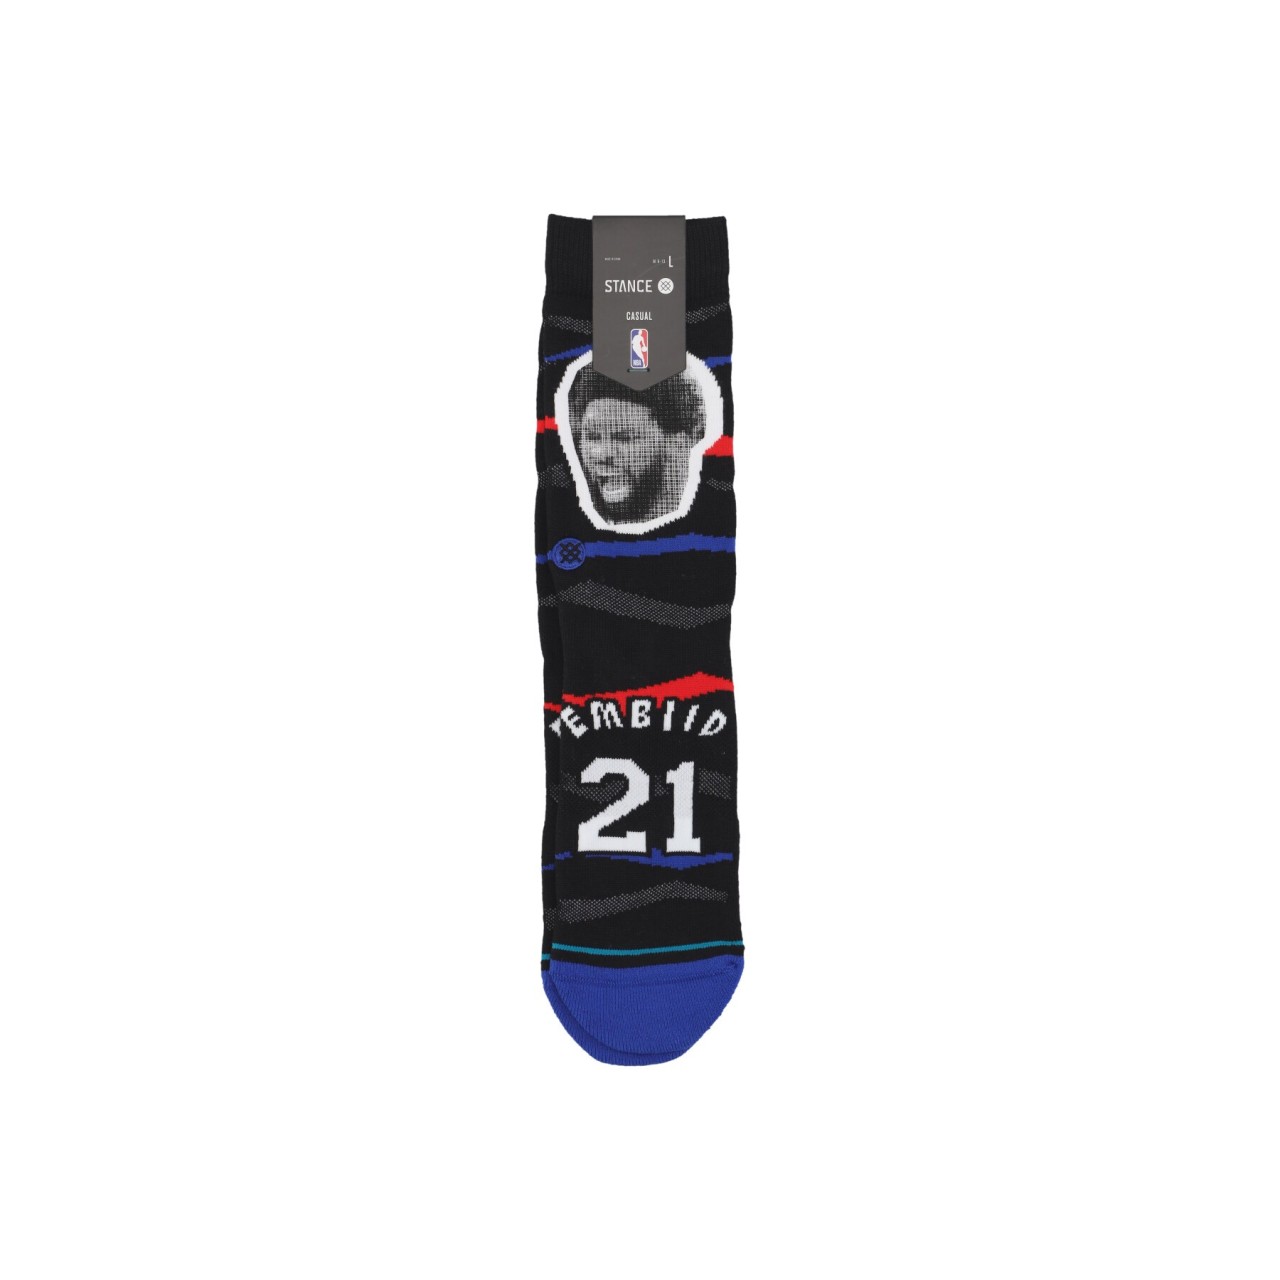 STANCE FAXED EMBIID A555C23EMB